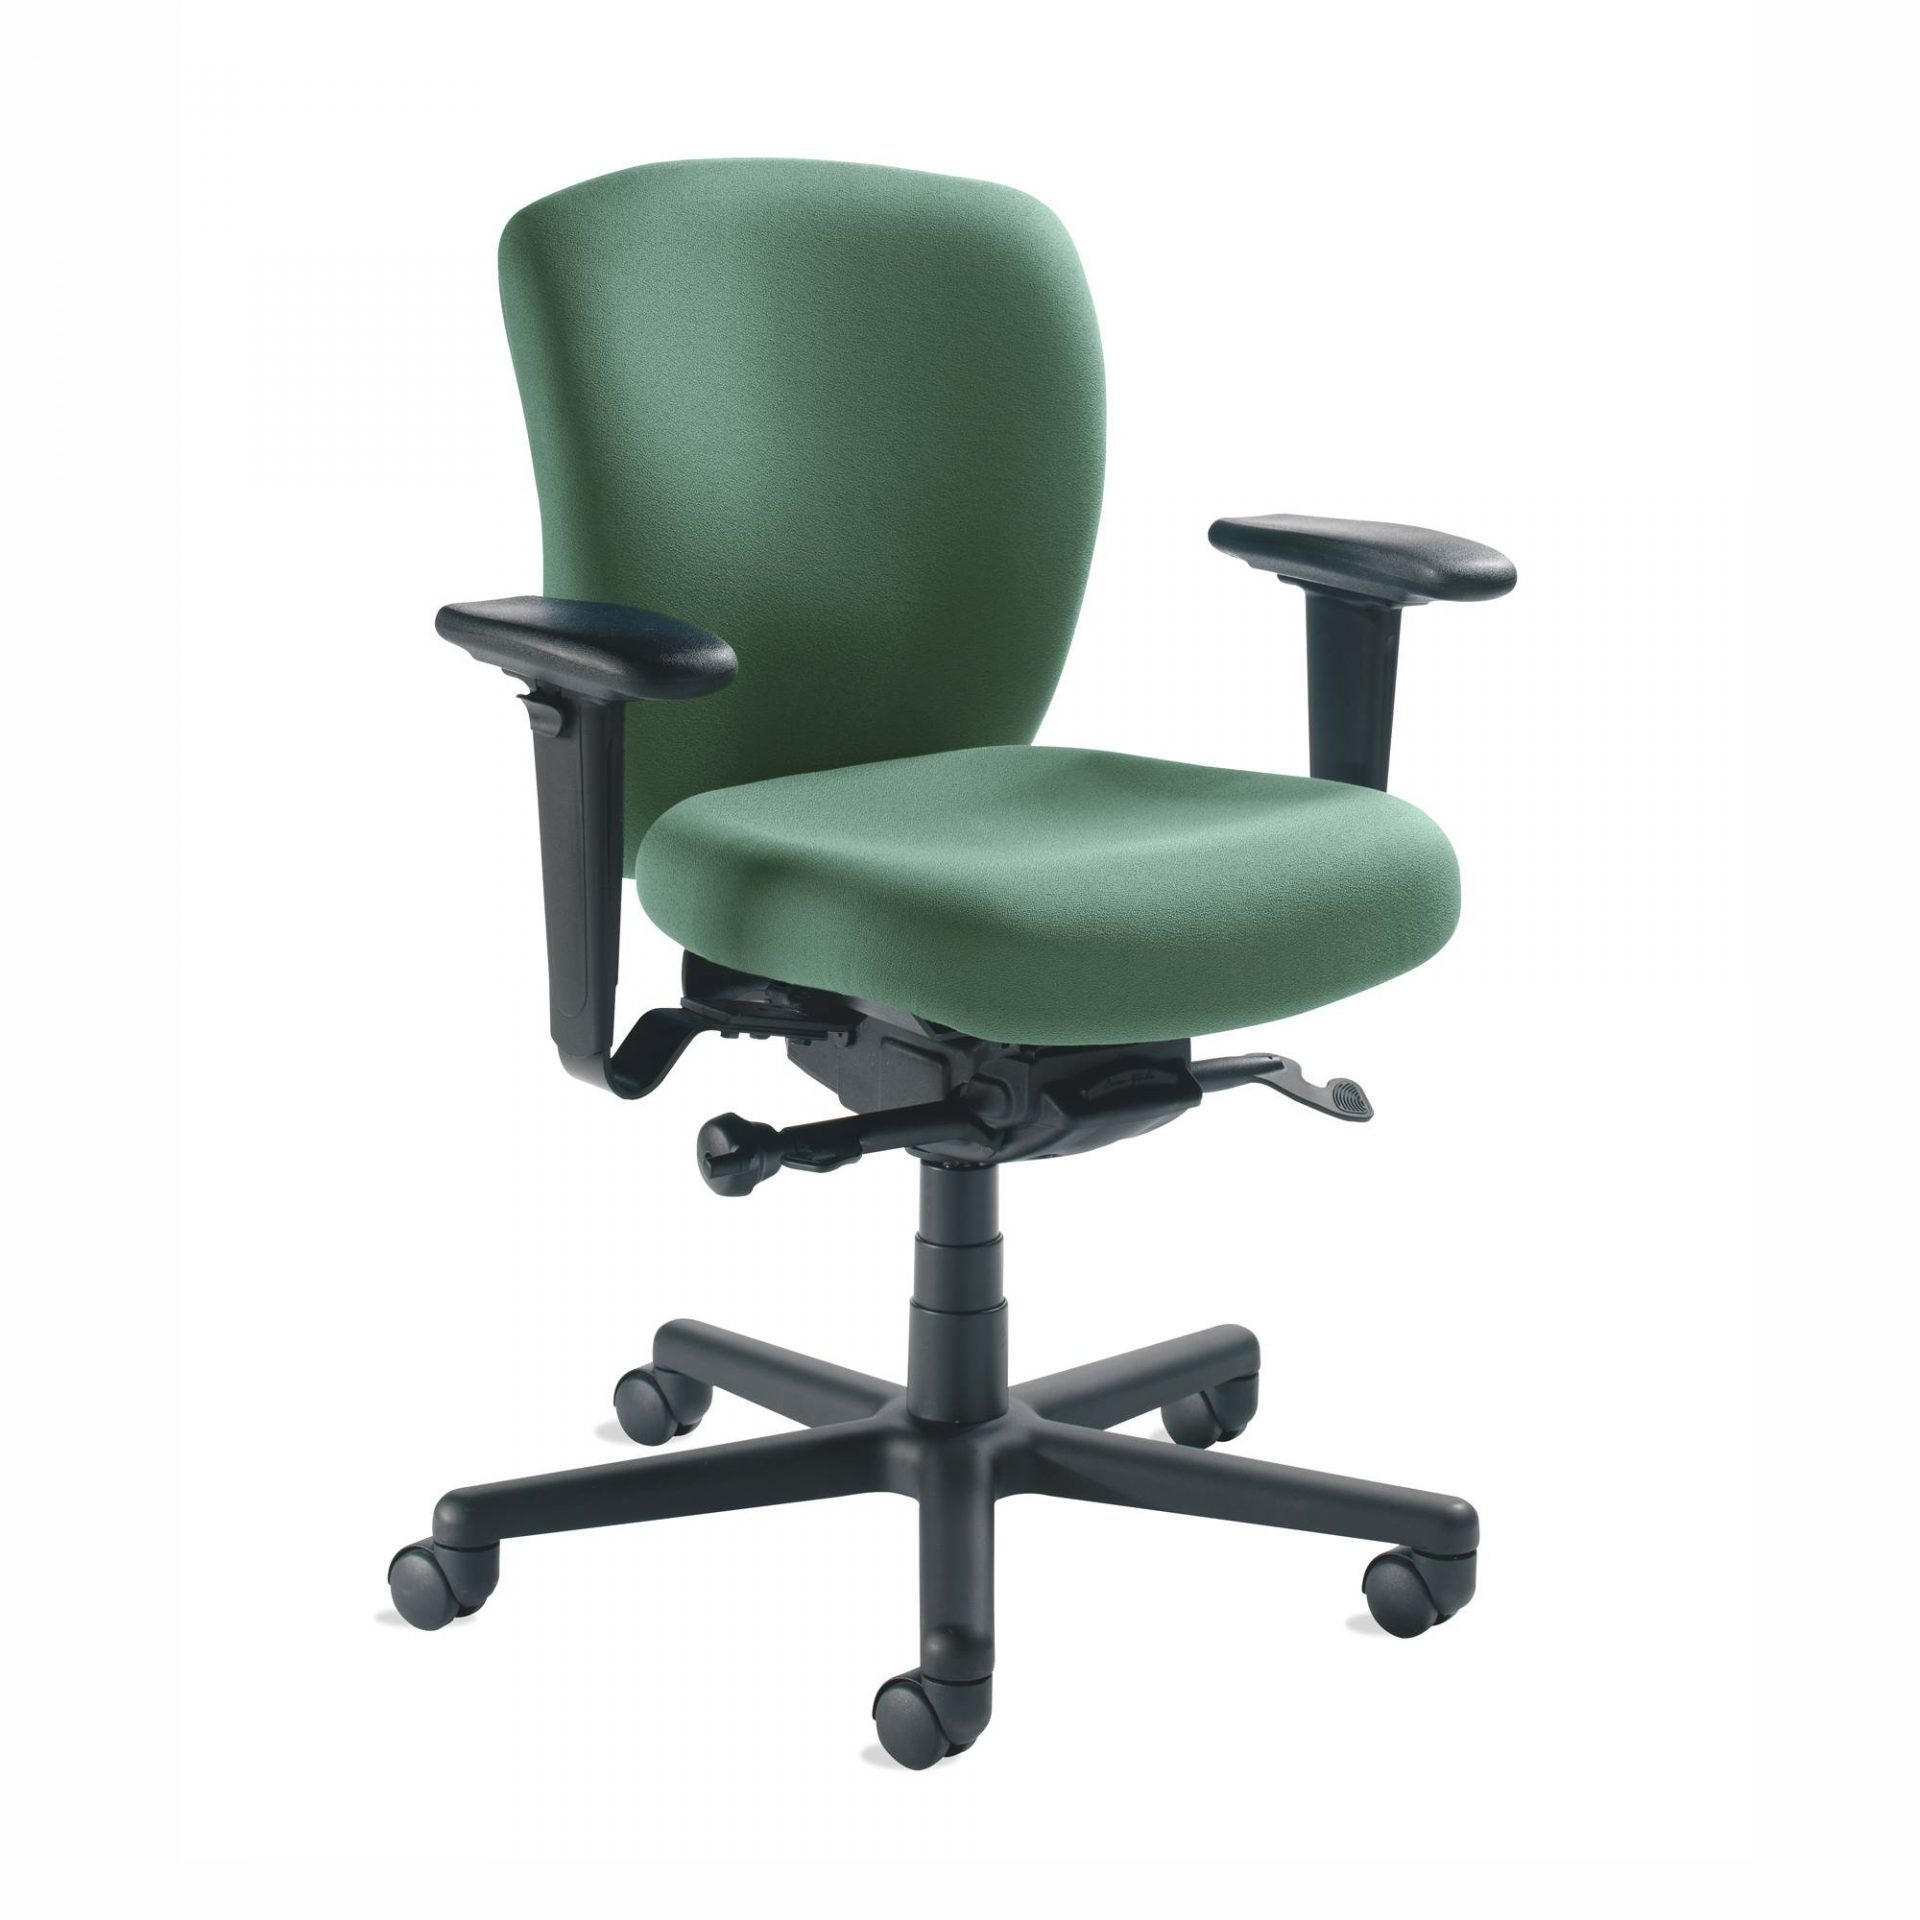 SitOnIt Non-Stop Heavy Duty Task Chair